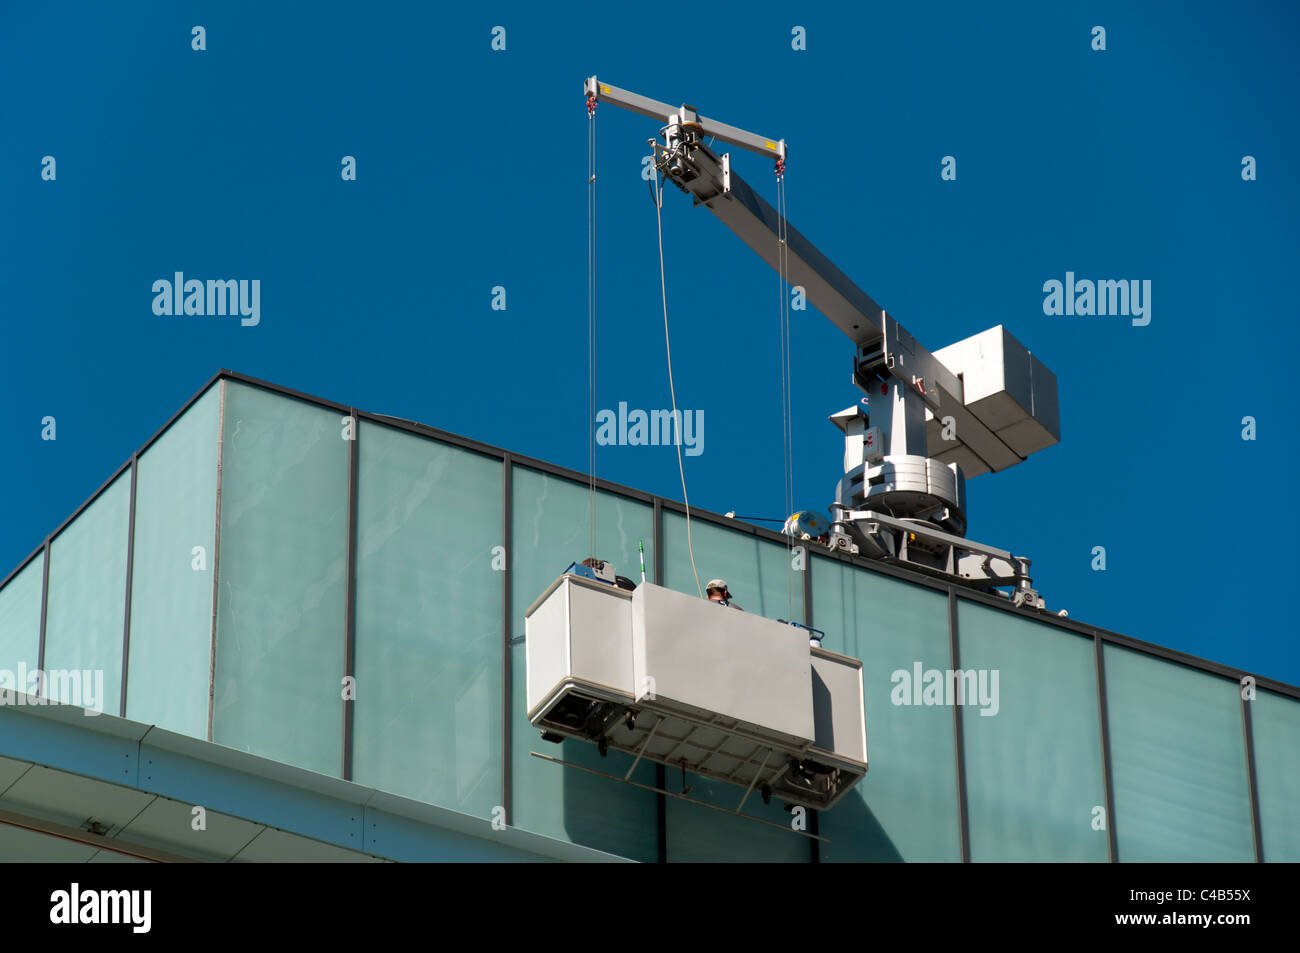 Workers on a suspended access platform at the MediaCityUK complex, Salford Quays, Manchester, England, UK Stock Photo